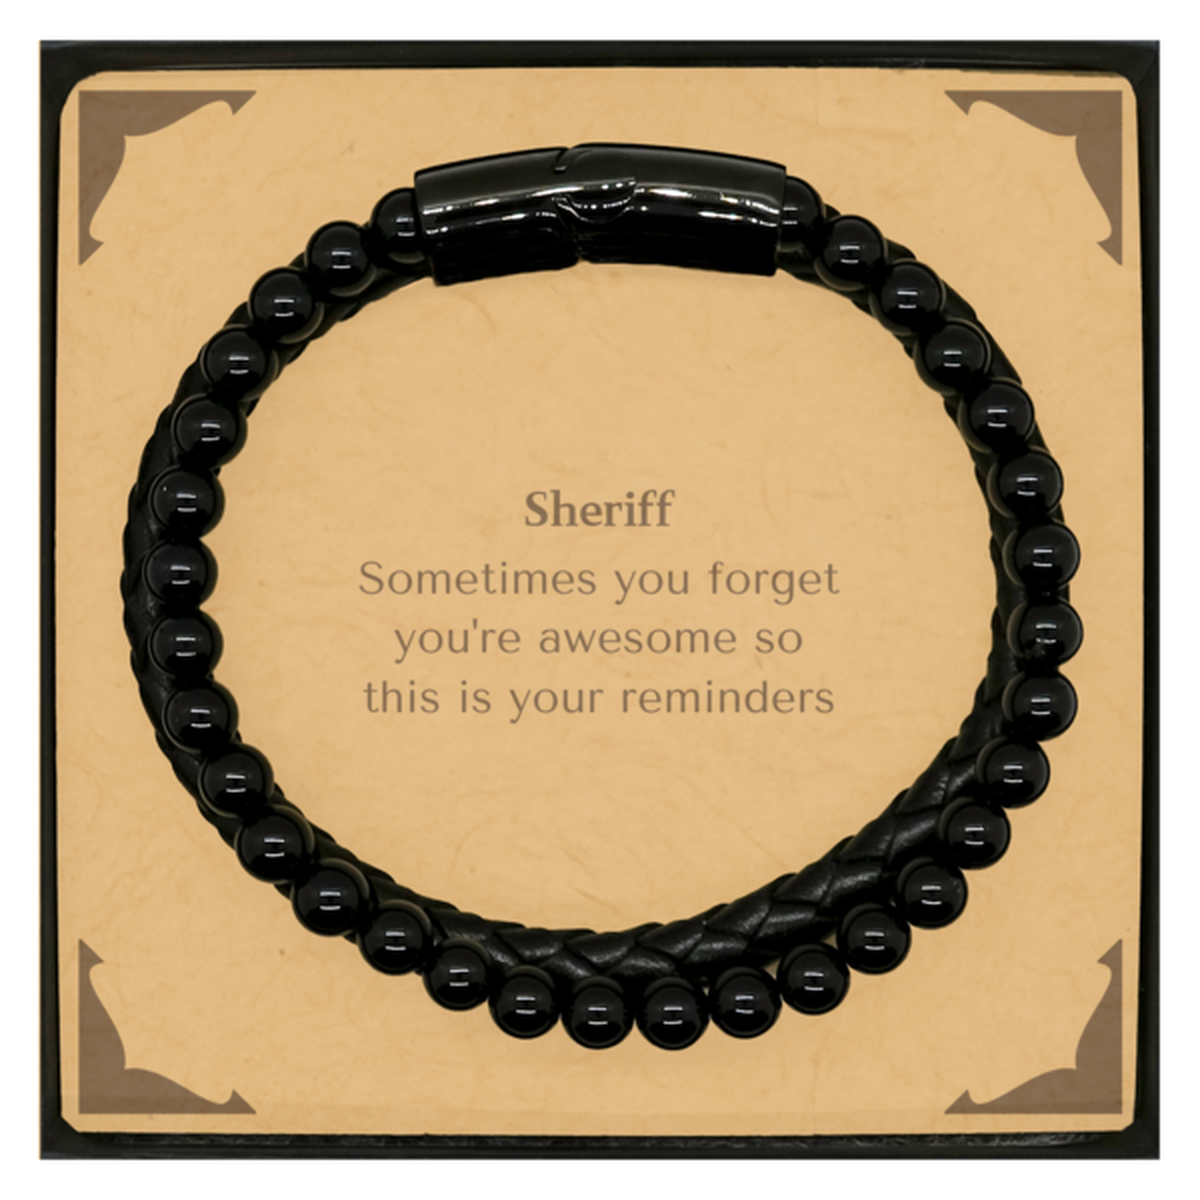 Sentimental Sheriff Stone Leather Bracelets, Sheriff Sometimes you forget you're awesome so this is your reminders, Graduation Christmas Birthday Gifts for Sheriff, Men, Women, Coworkers